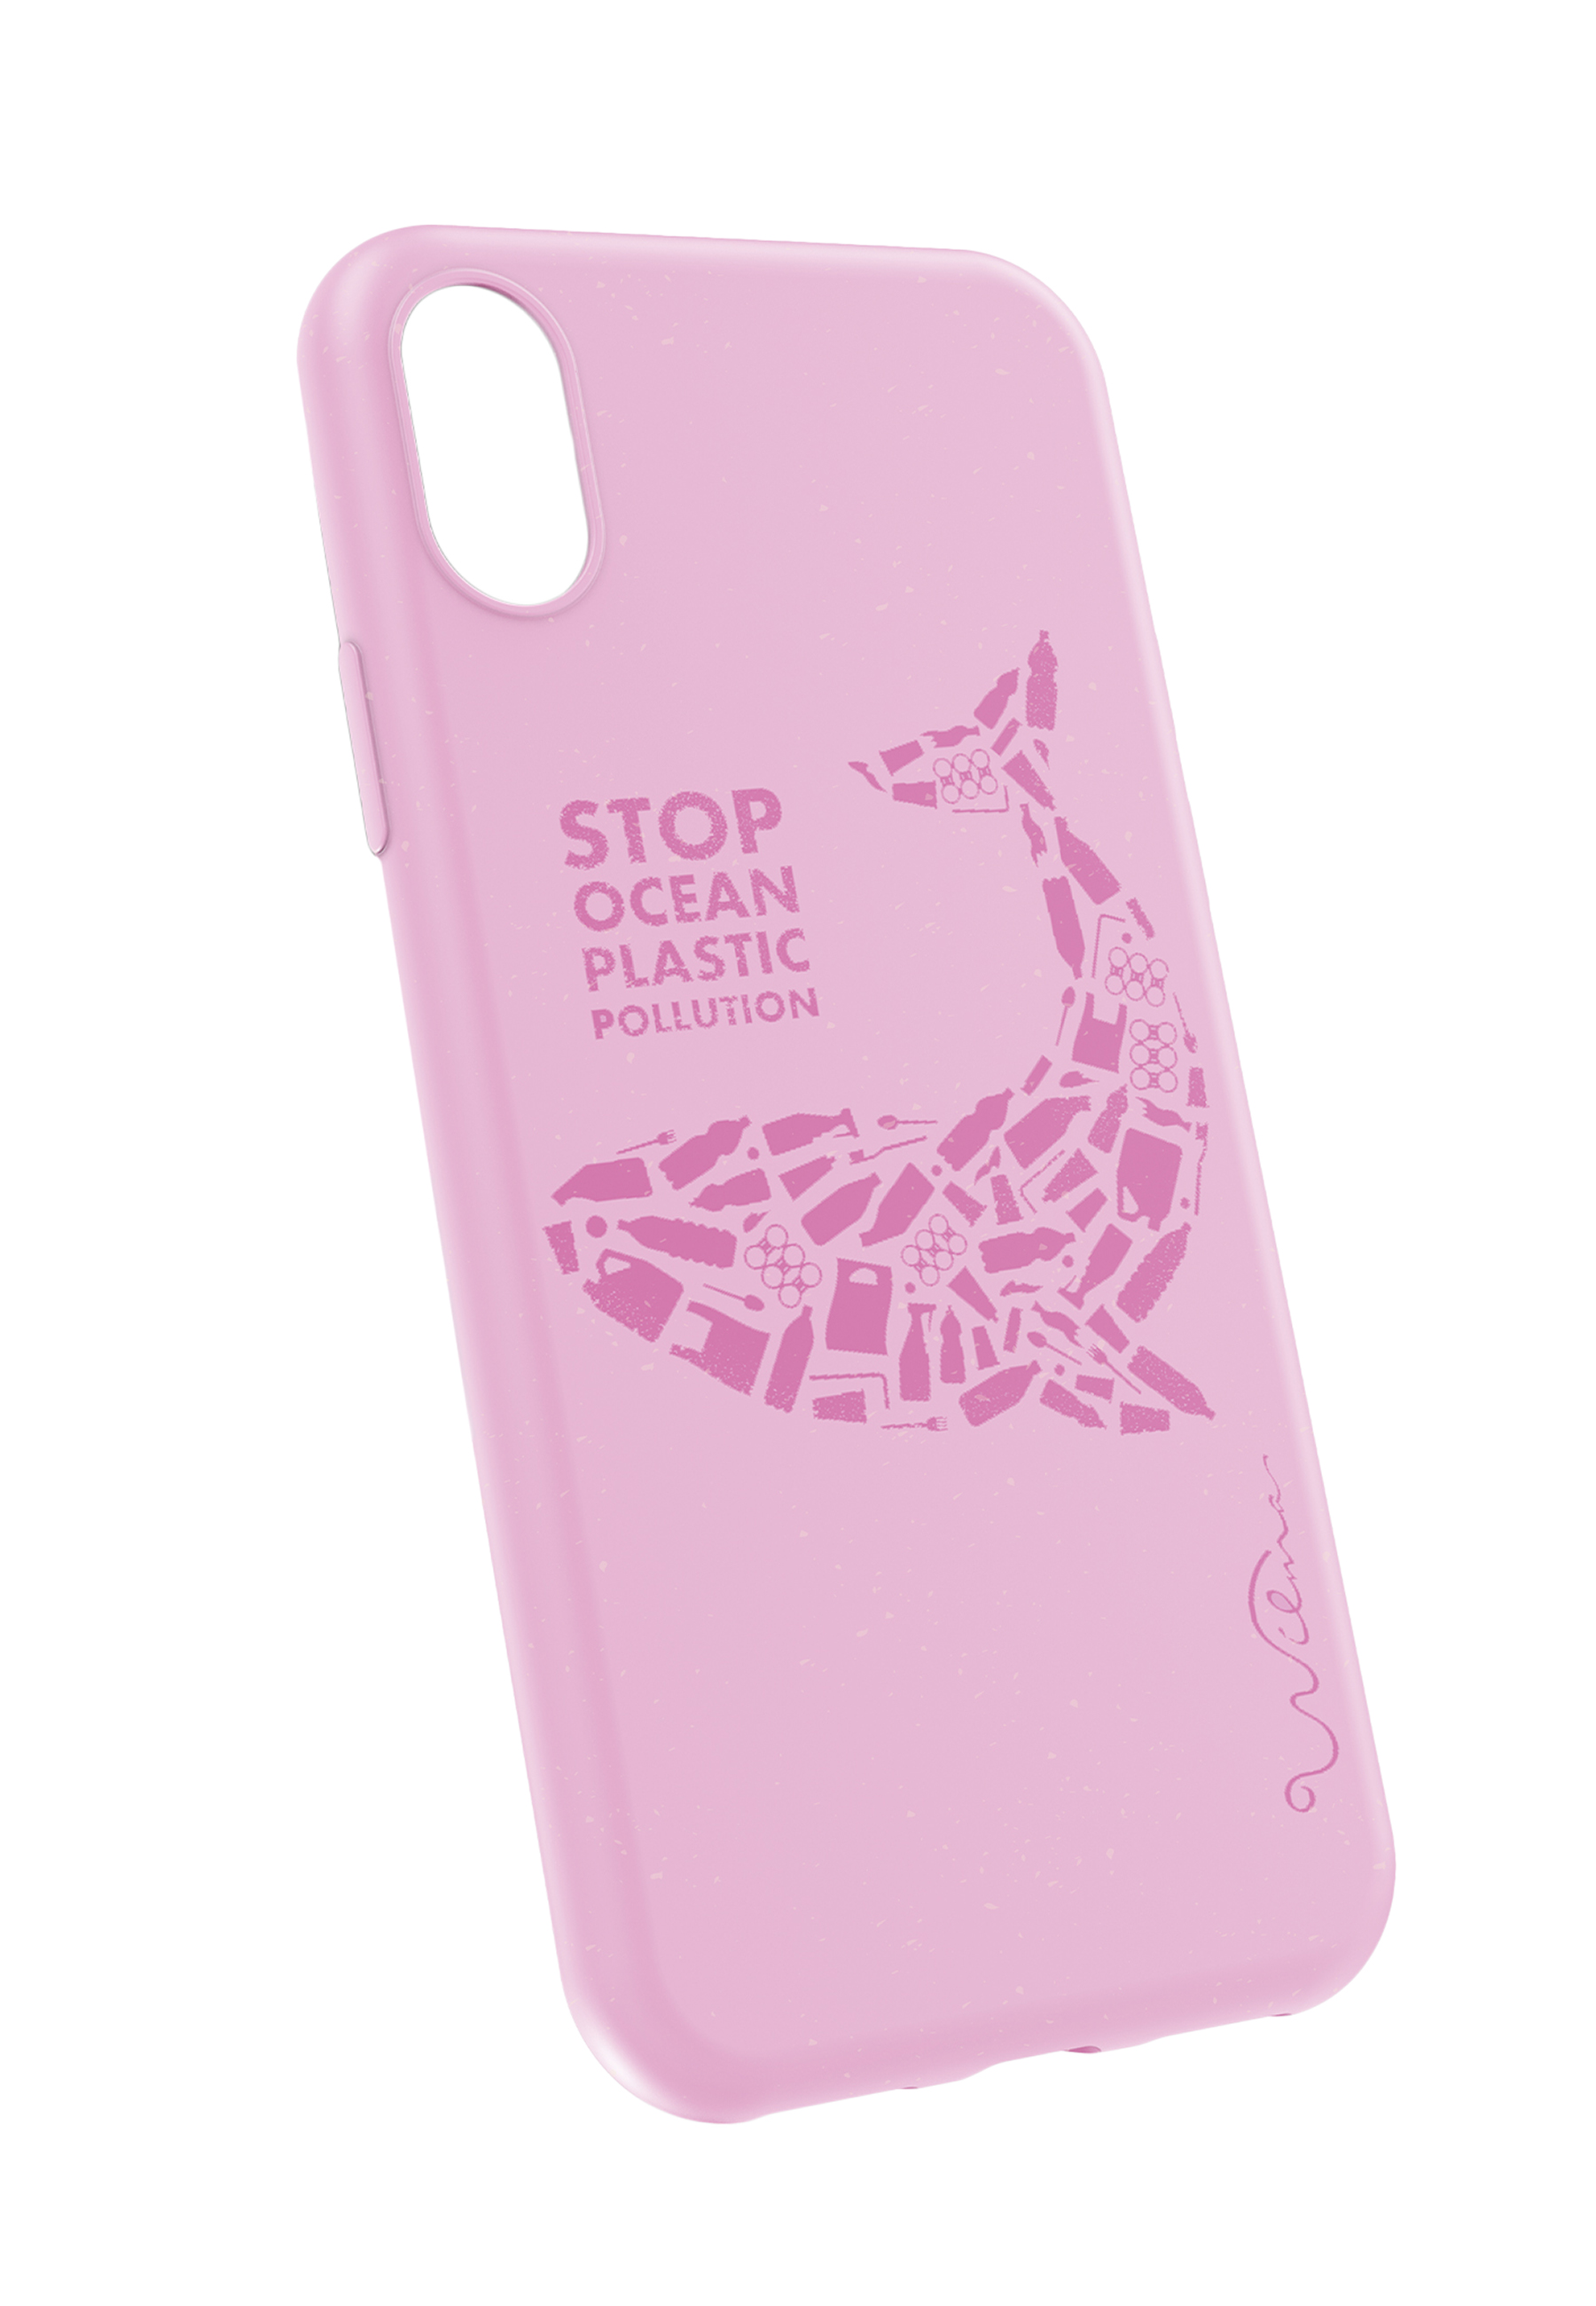 iPhone Backcover, pink Apple, FASHION BY WILMA ECO XR, RIPXR,